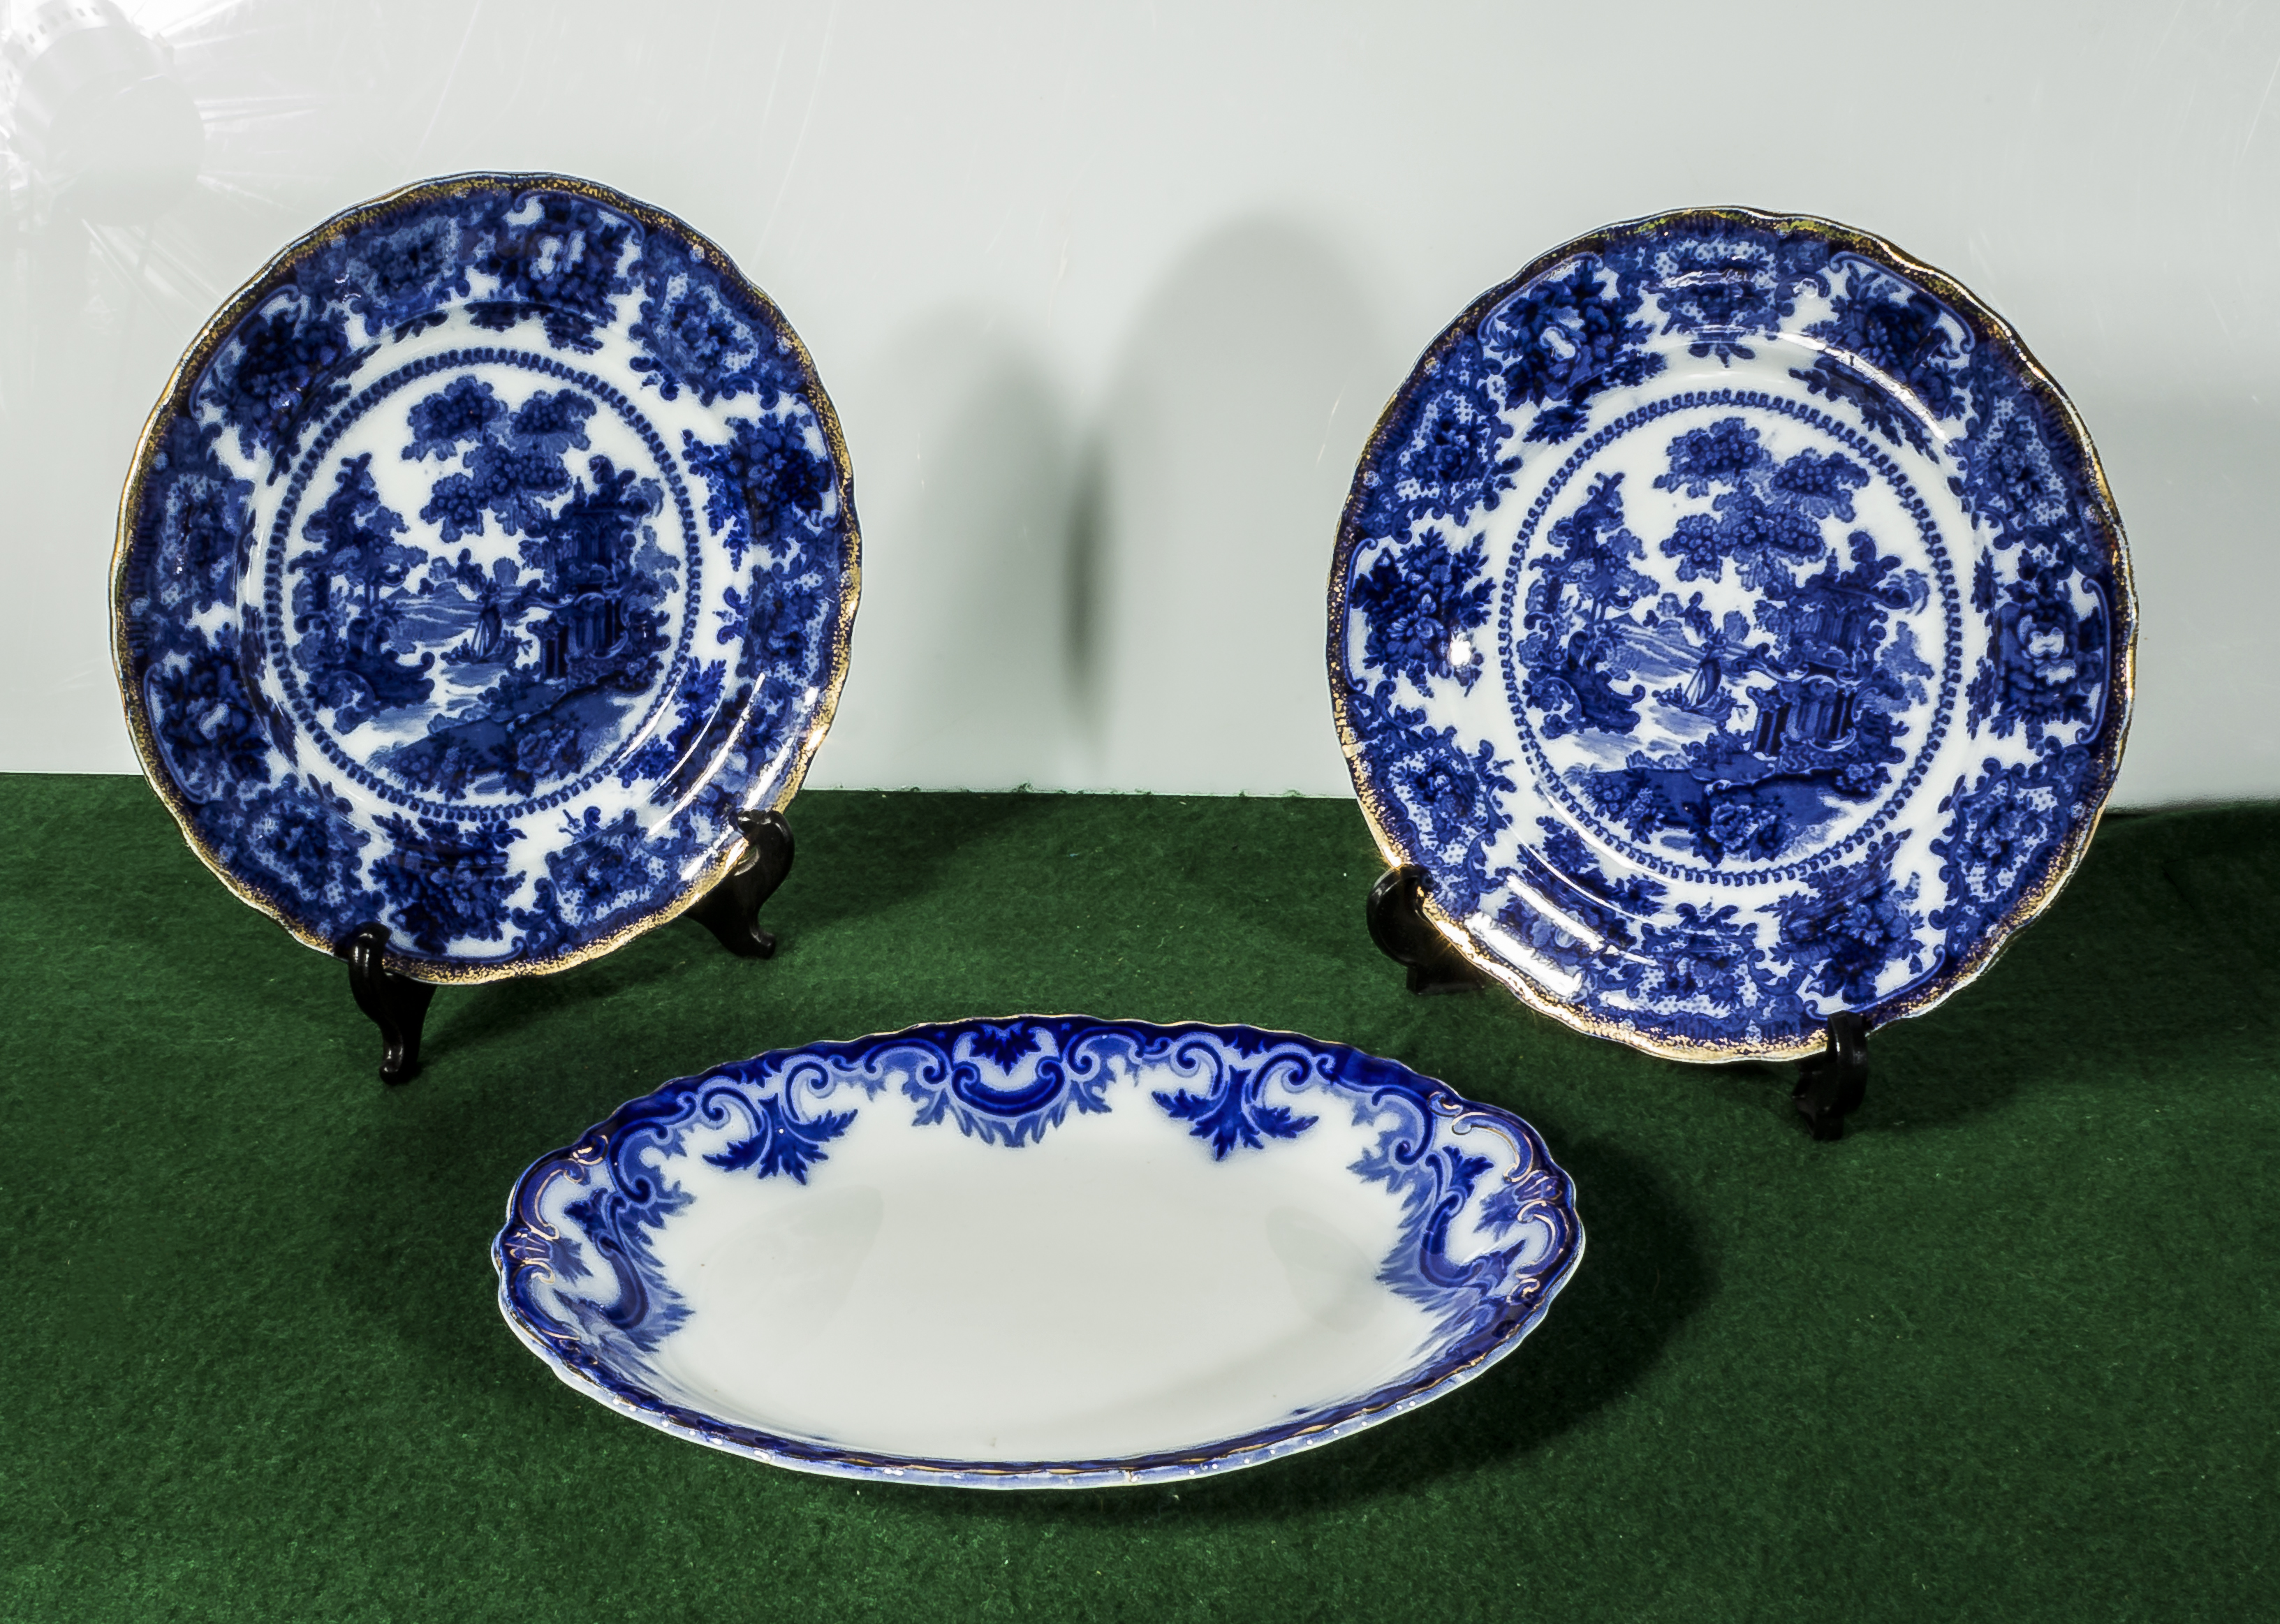 A pair of flow blue plates and an oval serving dish